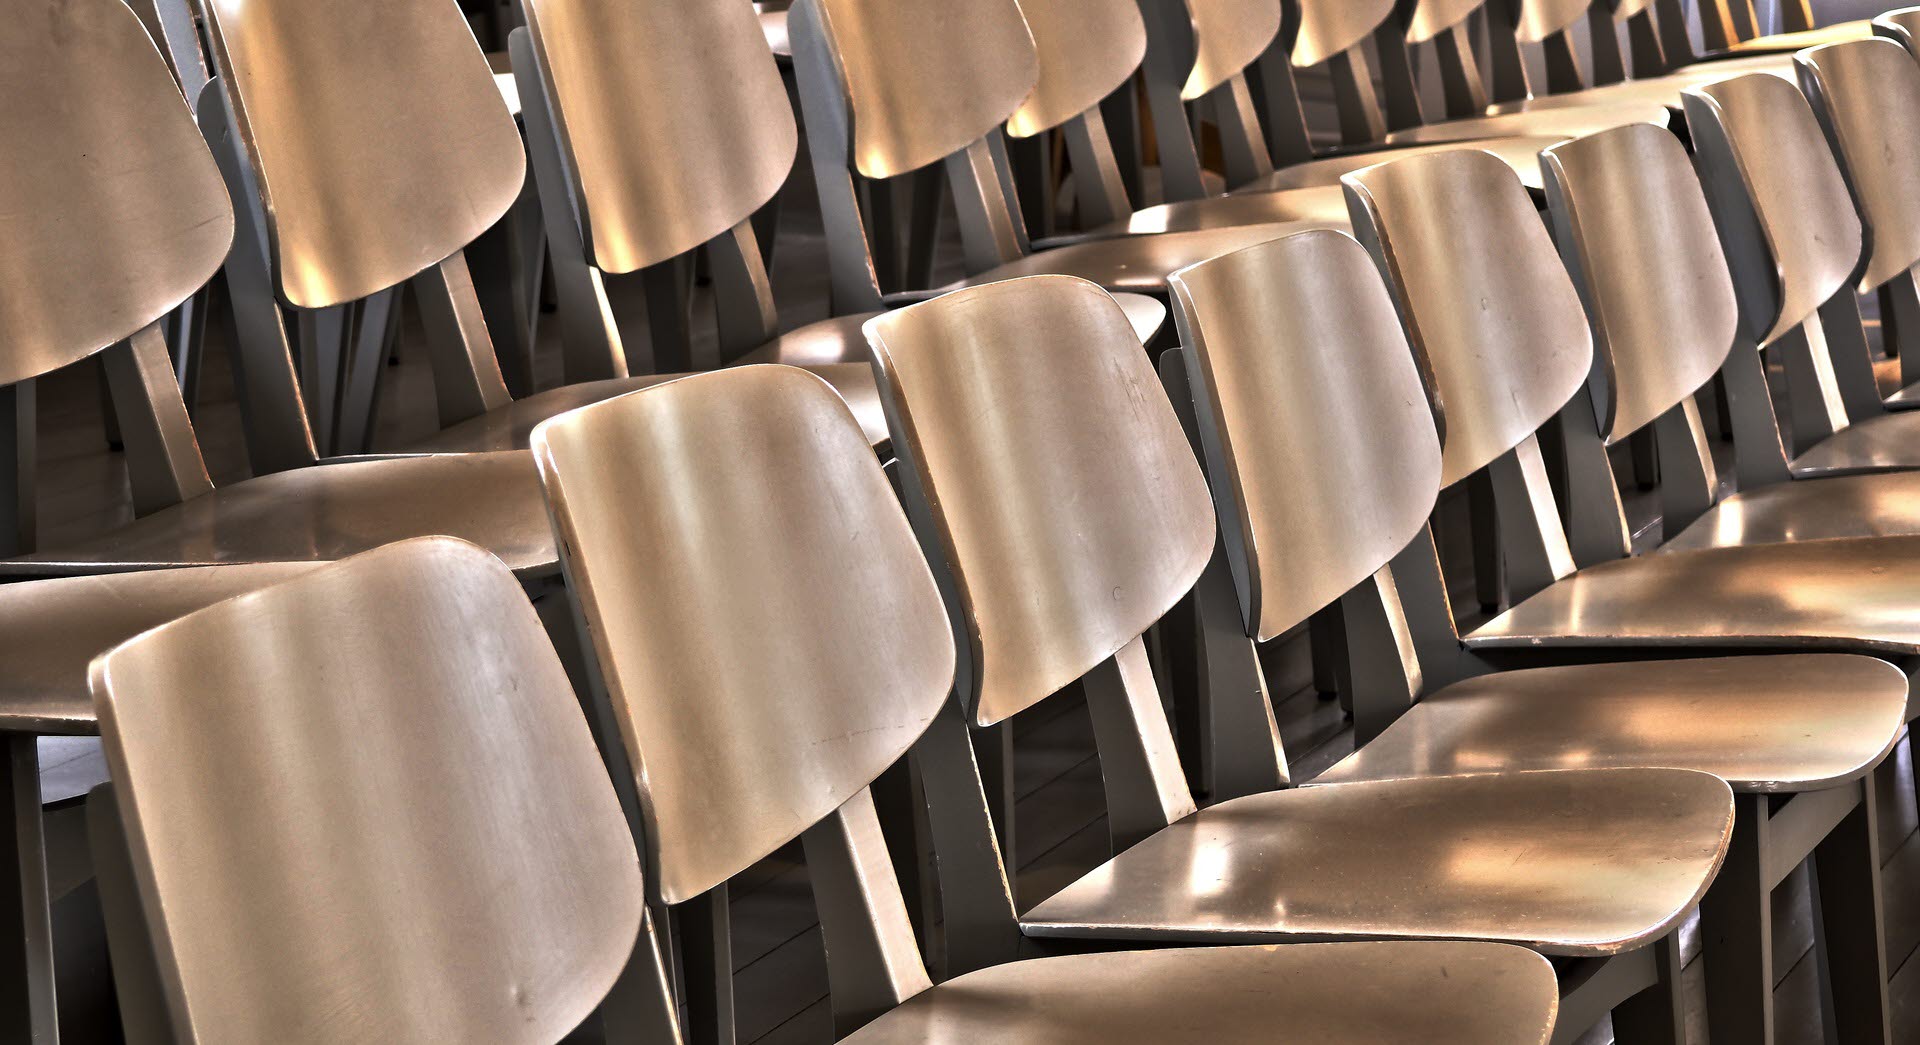 Chairs at an event